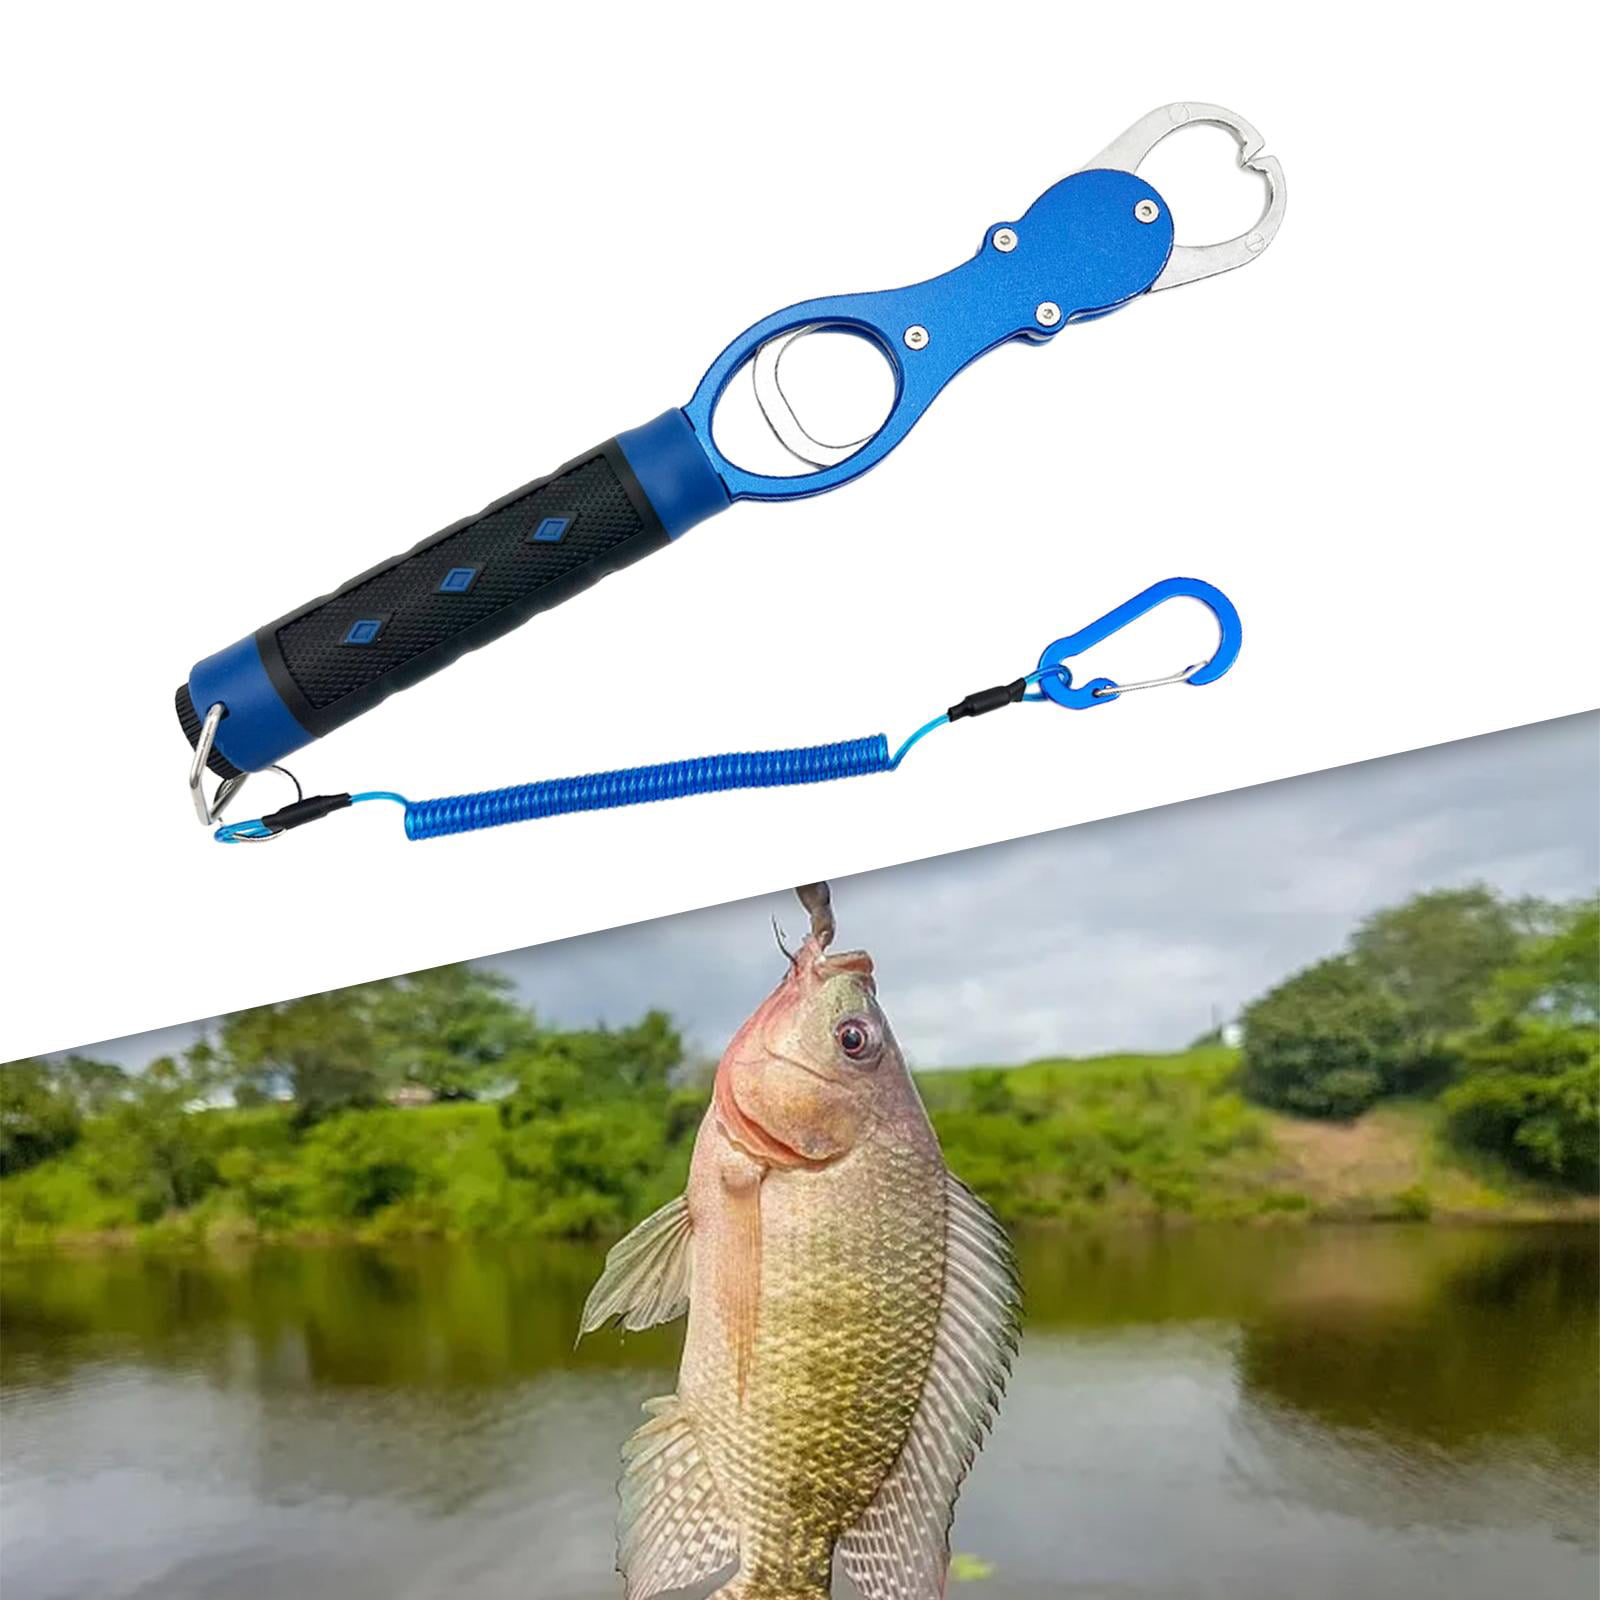 Fishing Lip Gripper,Fish Lip Gripper with Scale Freshwater  Saltwater,Fishing Lip Gripper Portable Fish Lip Grabber,Fish Lip Grip Tool  Aluminum Fish Holder Nonslip,Fish Scales Weight Fishing Blue 